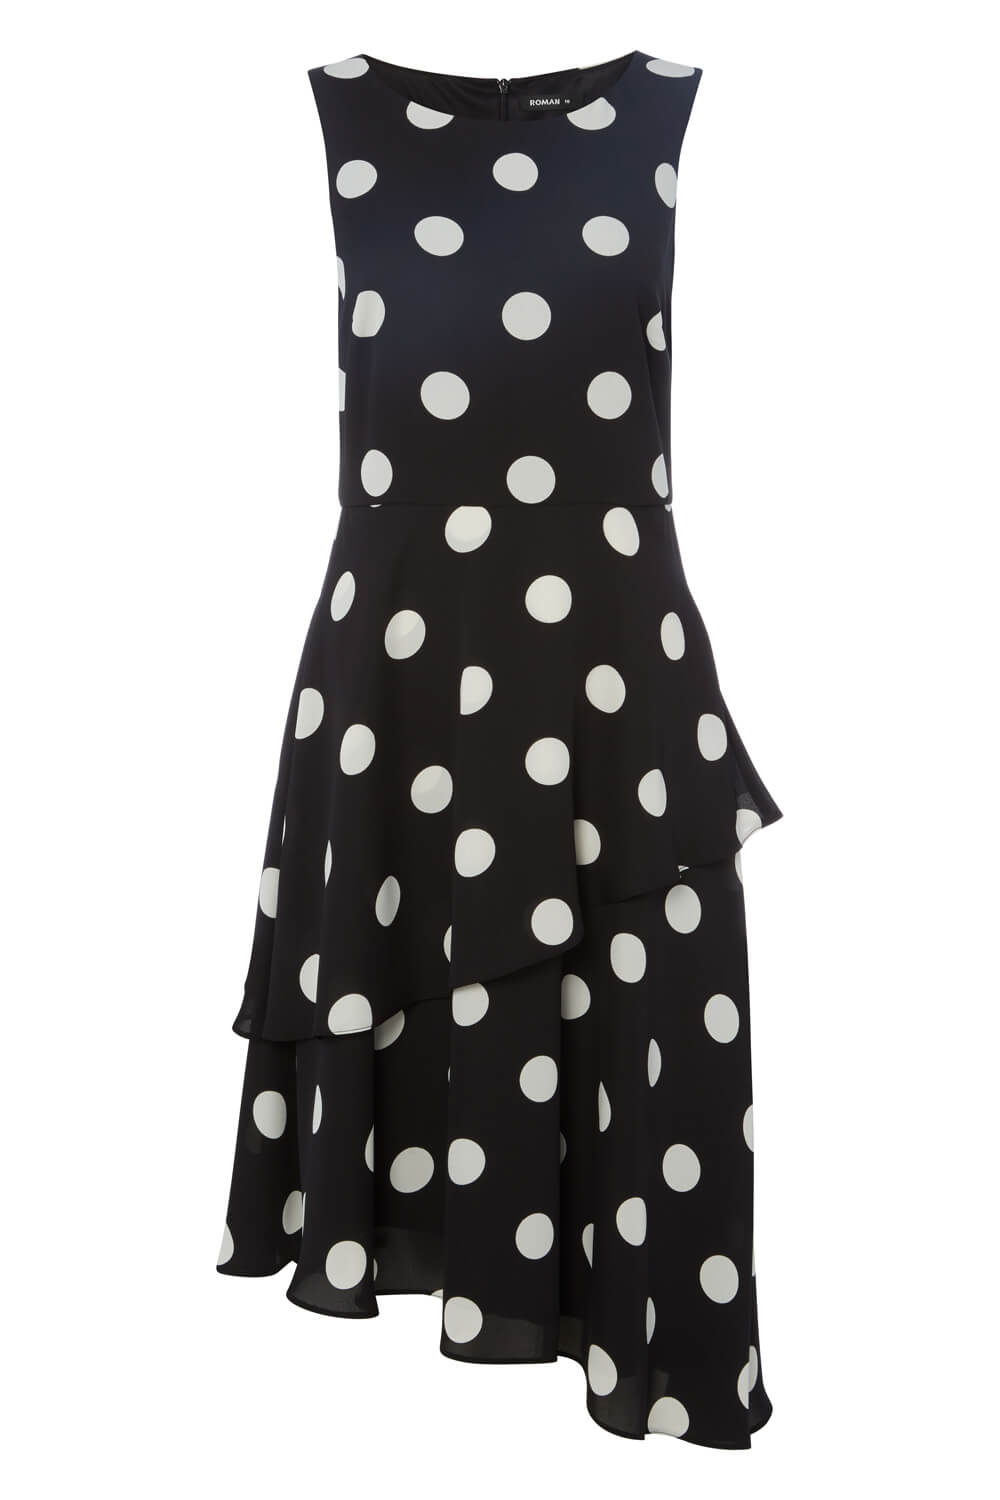 Black Spot Print Fit and Flare Dress, Image 5 of 5